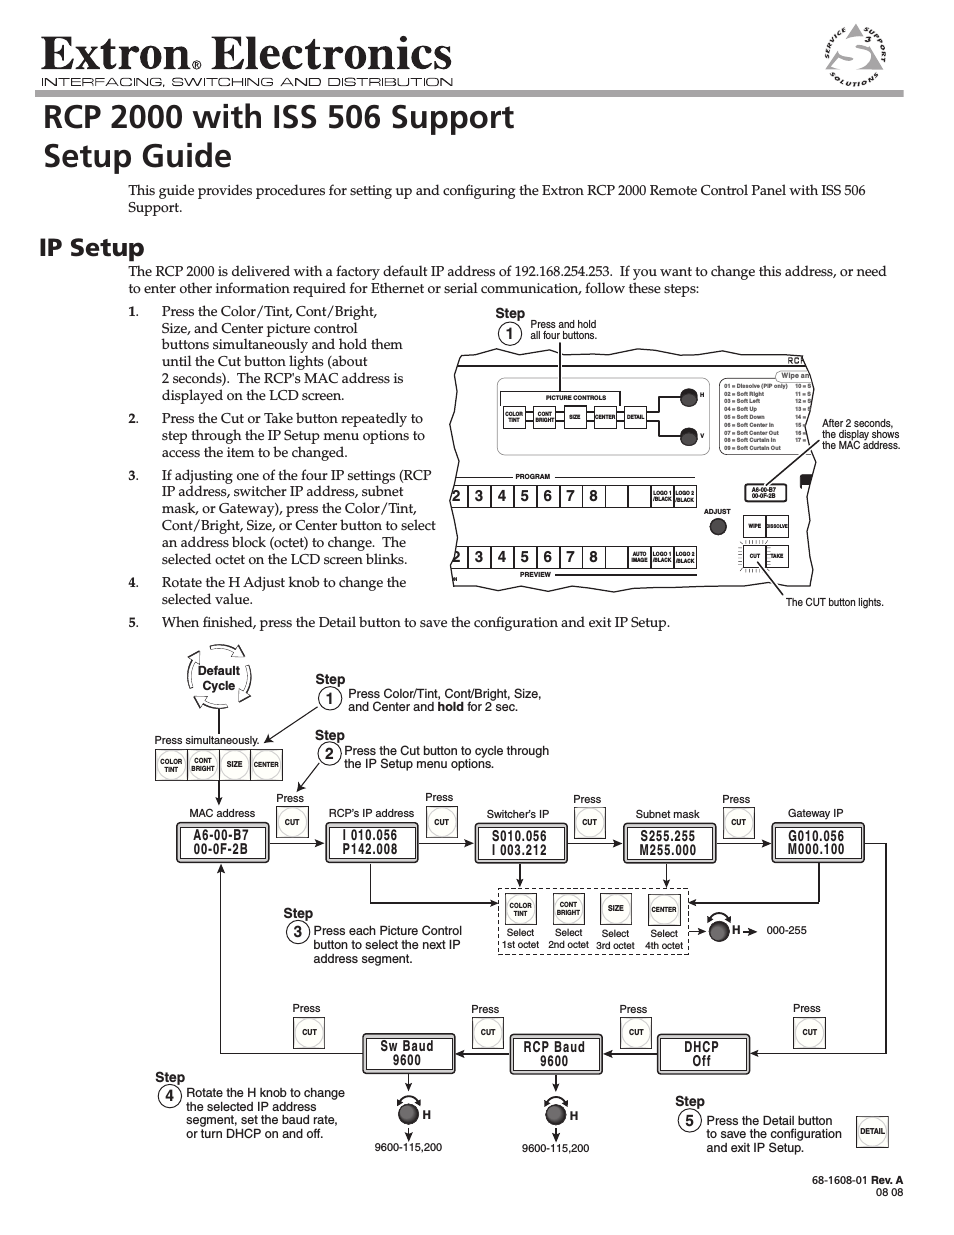 RCP 2000 with ISS 506 Support Setup Guide